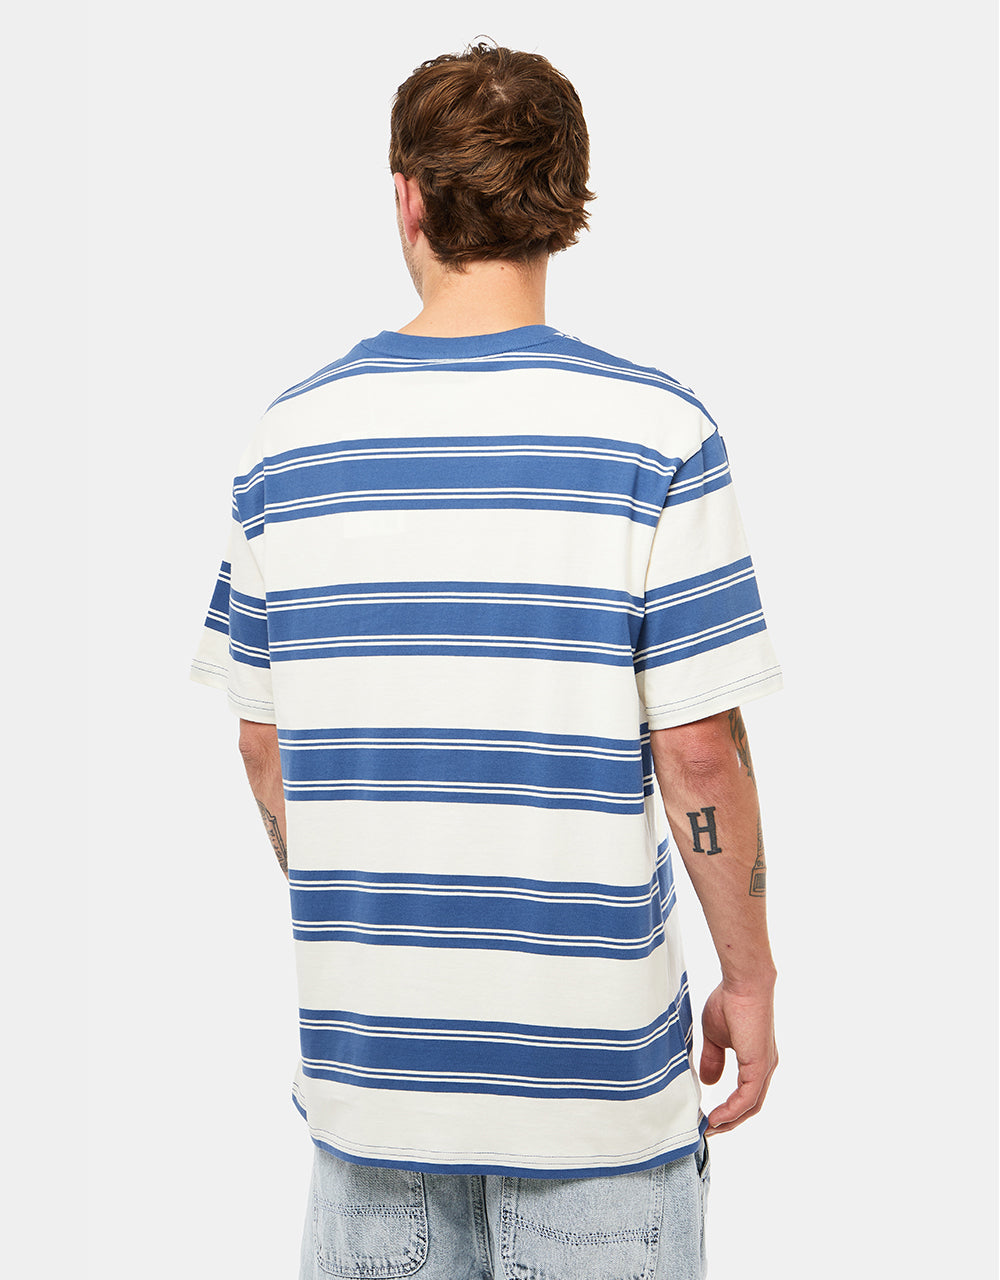 Route One Organic Lewis Stripe T-Shirt - French Navy/Raw